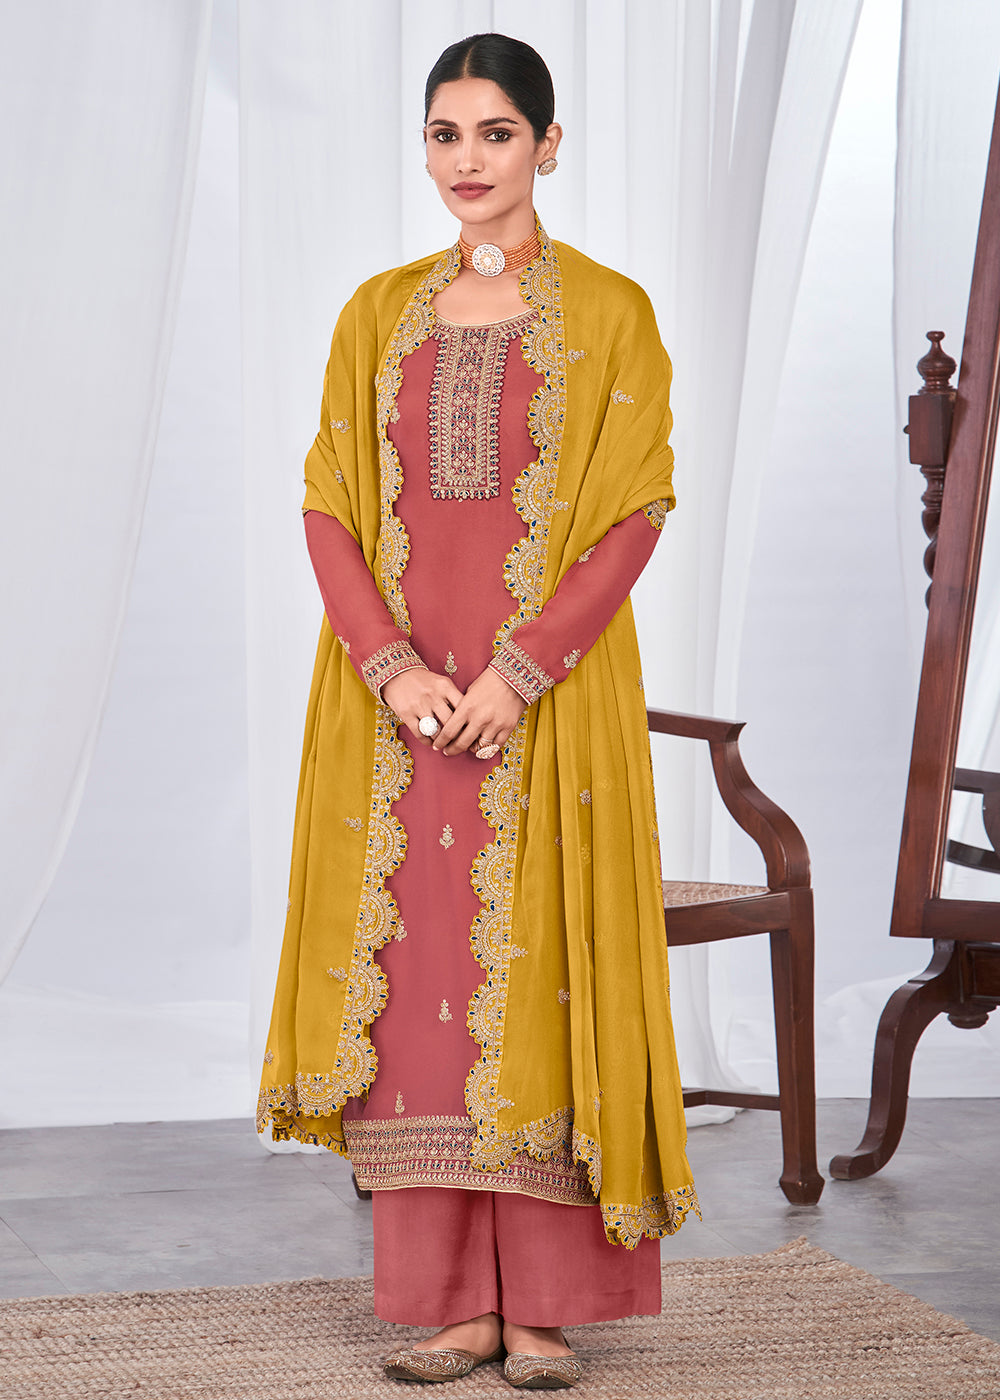 Buy Now Pretty Looking Peach Indian Party Wear Salwar Suit Online in USA, UK, Canada, Germany & Worldwide at Empress Clothing.